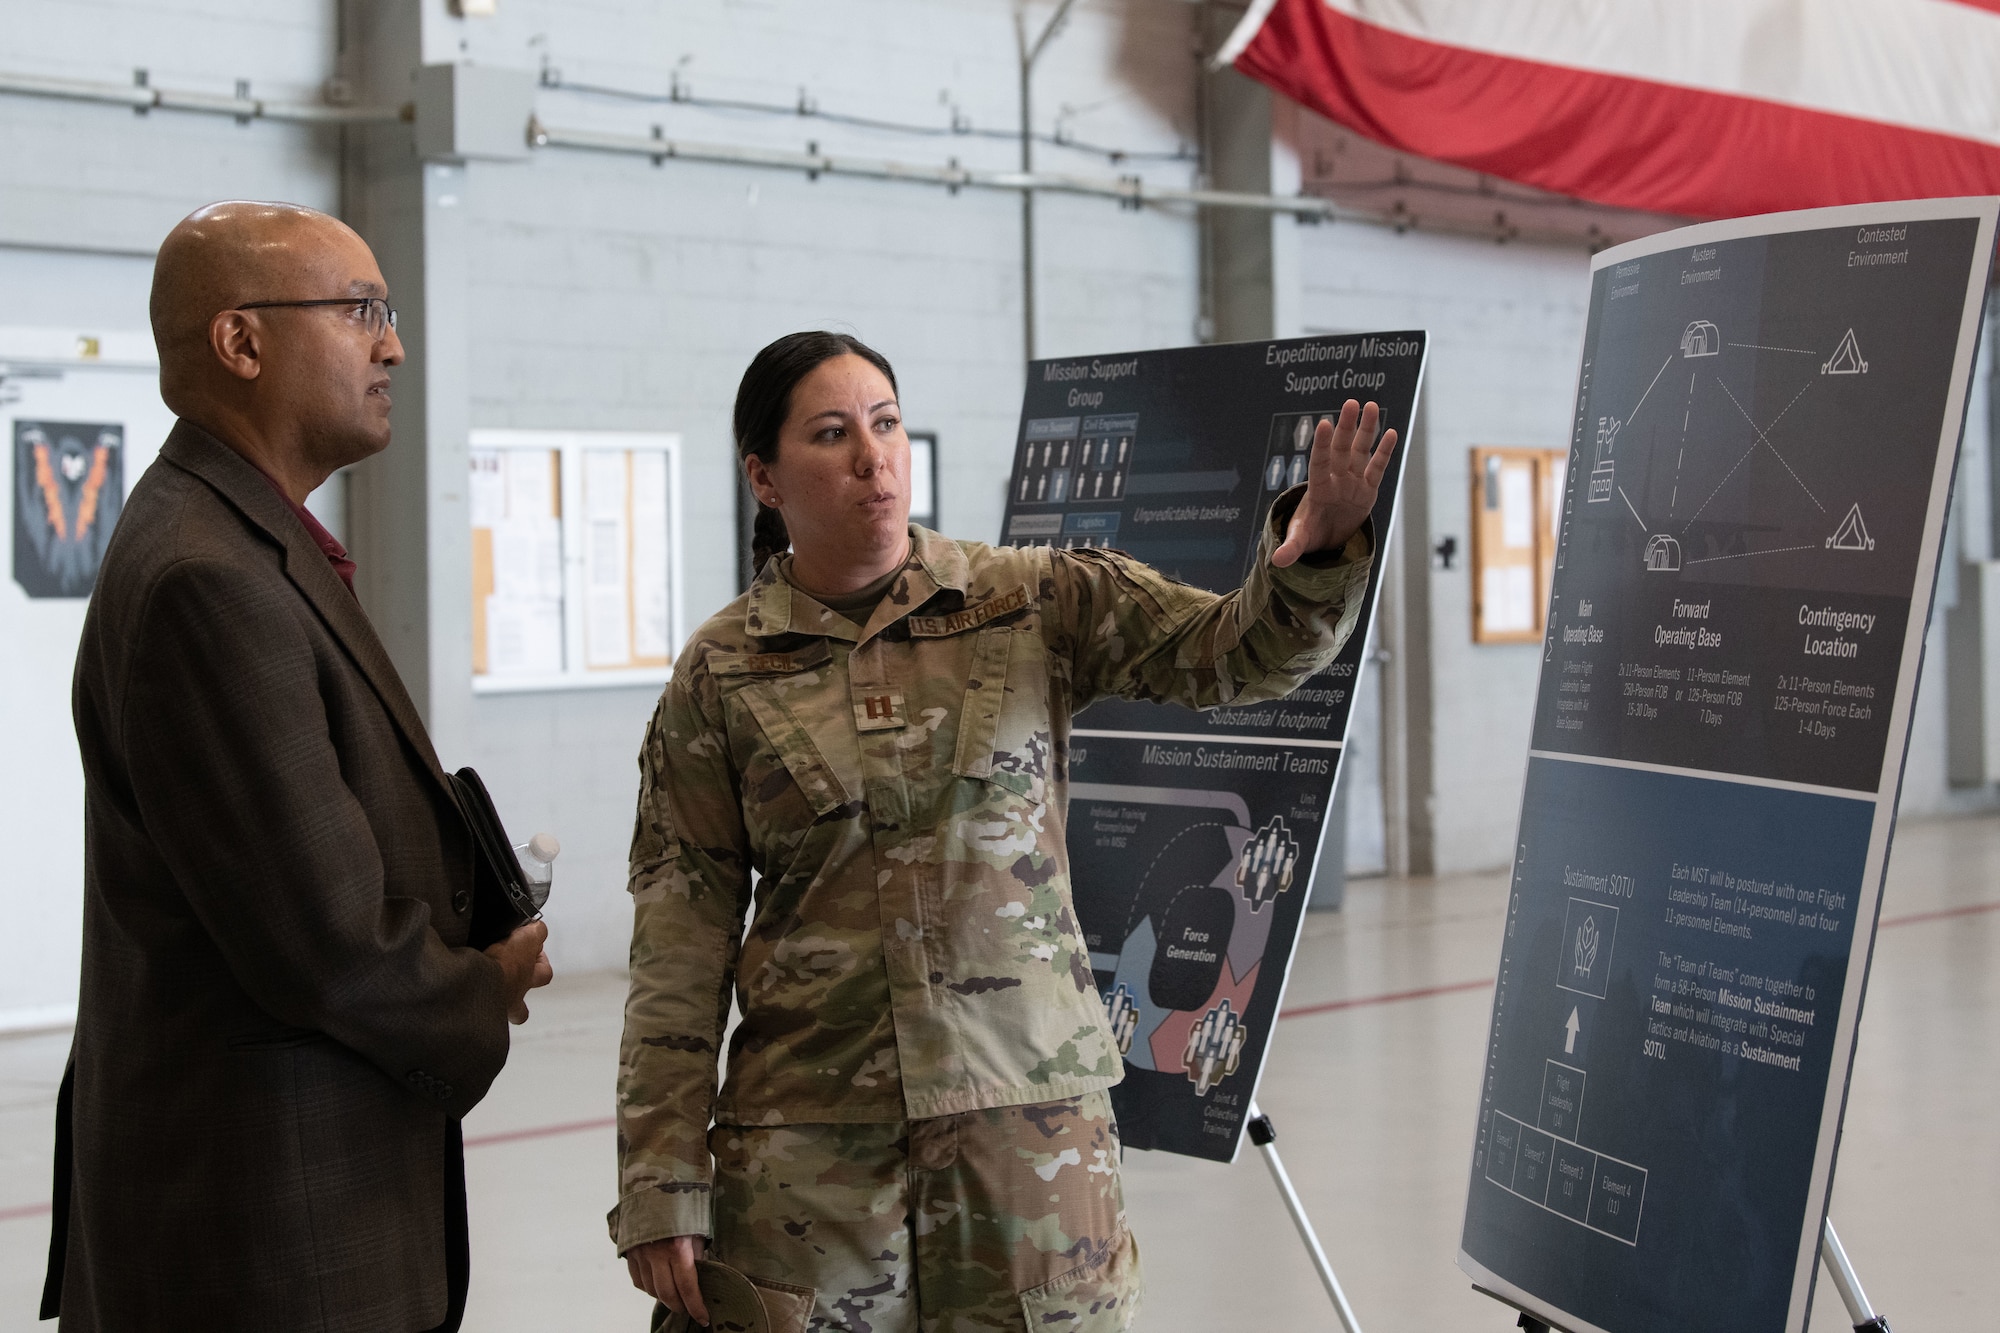 U.S. Air Force Capt. Melissa Cecil, a Mission Sustainment Team member, speaks with Dr. Sandeep Mulgund, senior advisor to the Deputy Chief of Staff for Operations of the U.S. Air Force at Hurlburt Field, Florida, July 20, 2022. The MST works to establish forward operating bases in austere locations by providing initial site security, receiving cargo and personnel and setting up shelter.